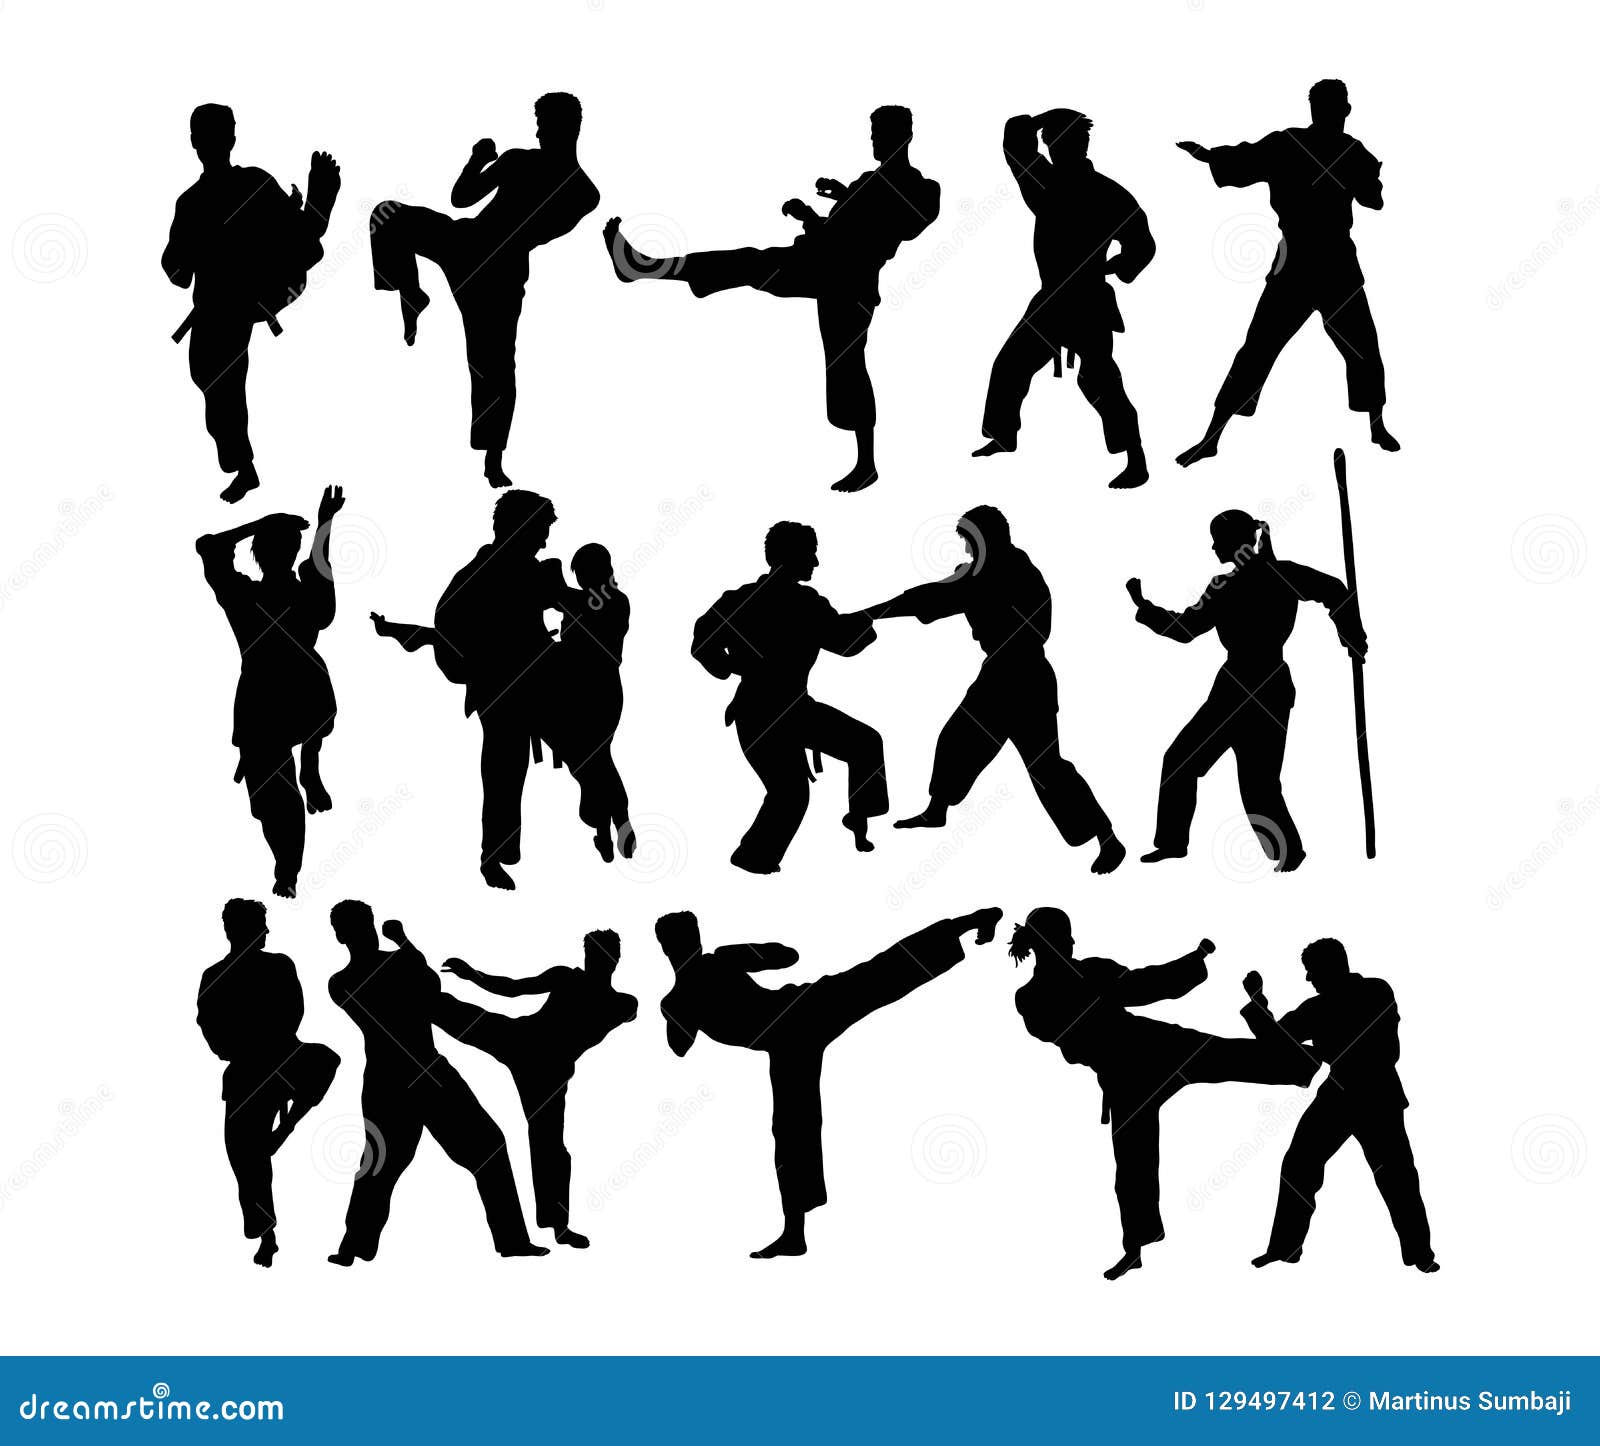 Martial Art and Karate Silhouettes Stock Vector - Illustration of ...